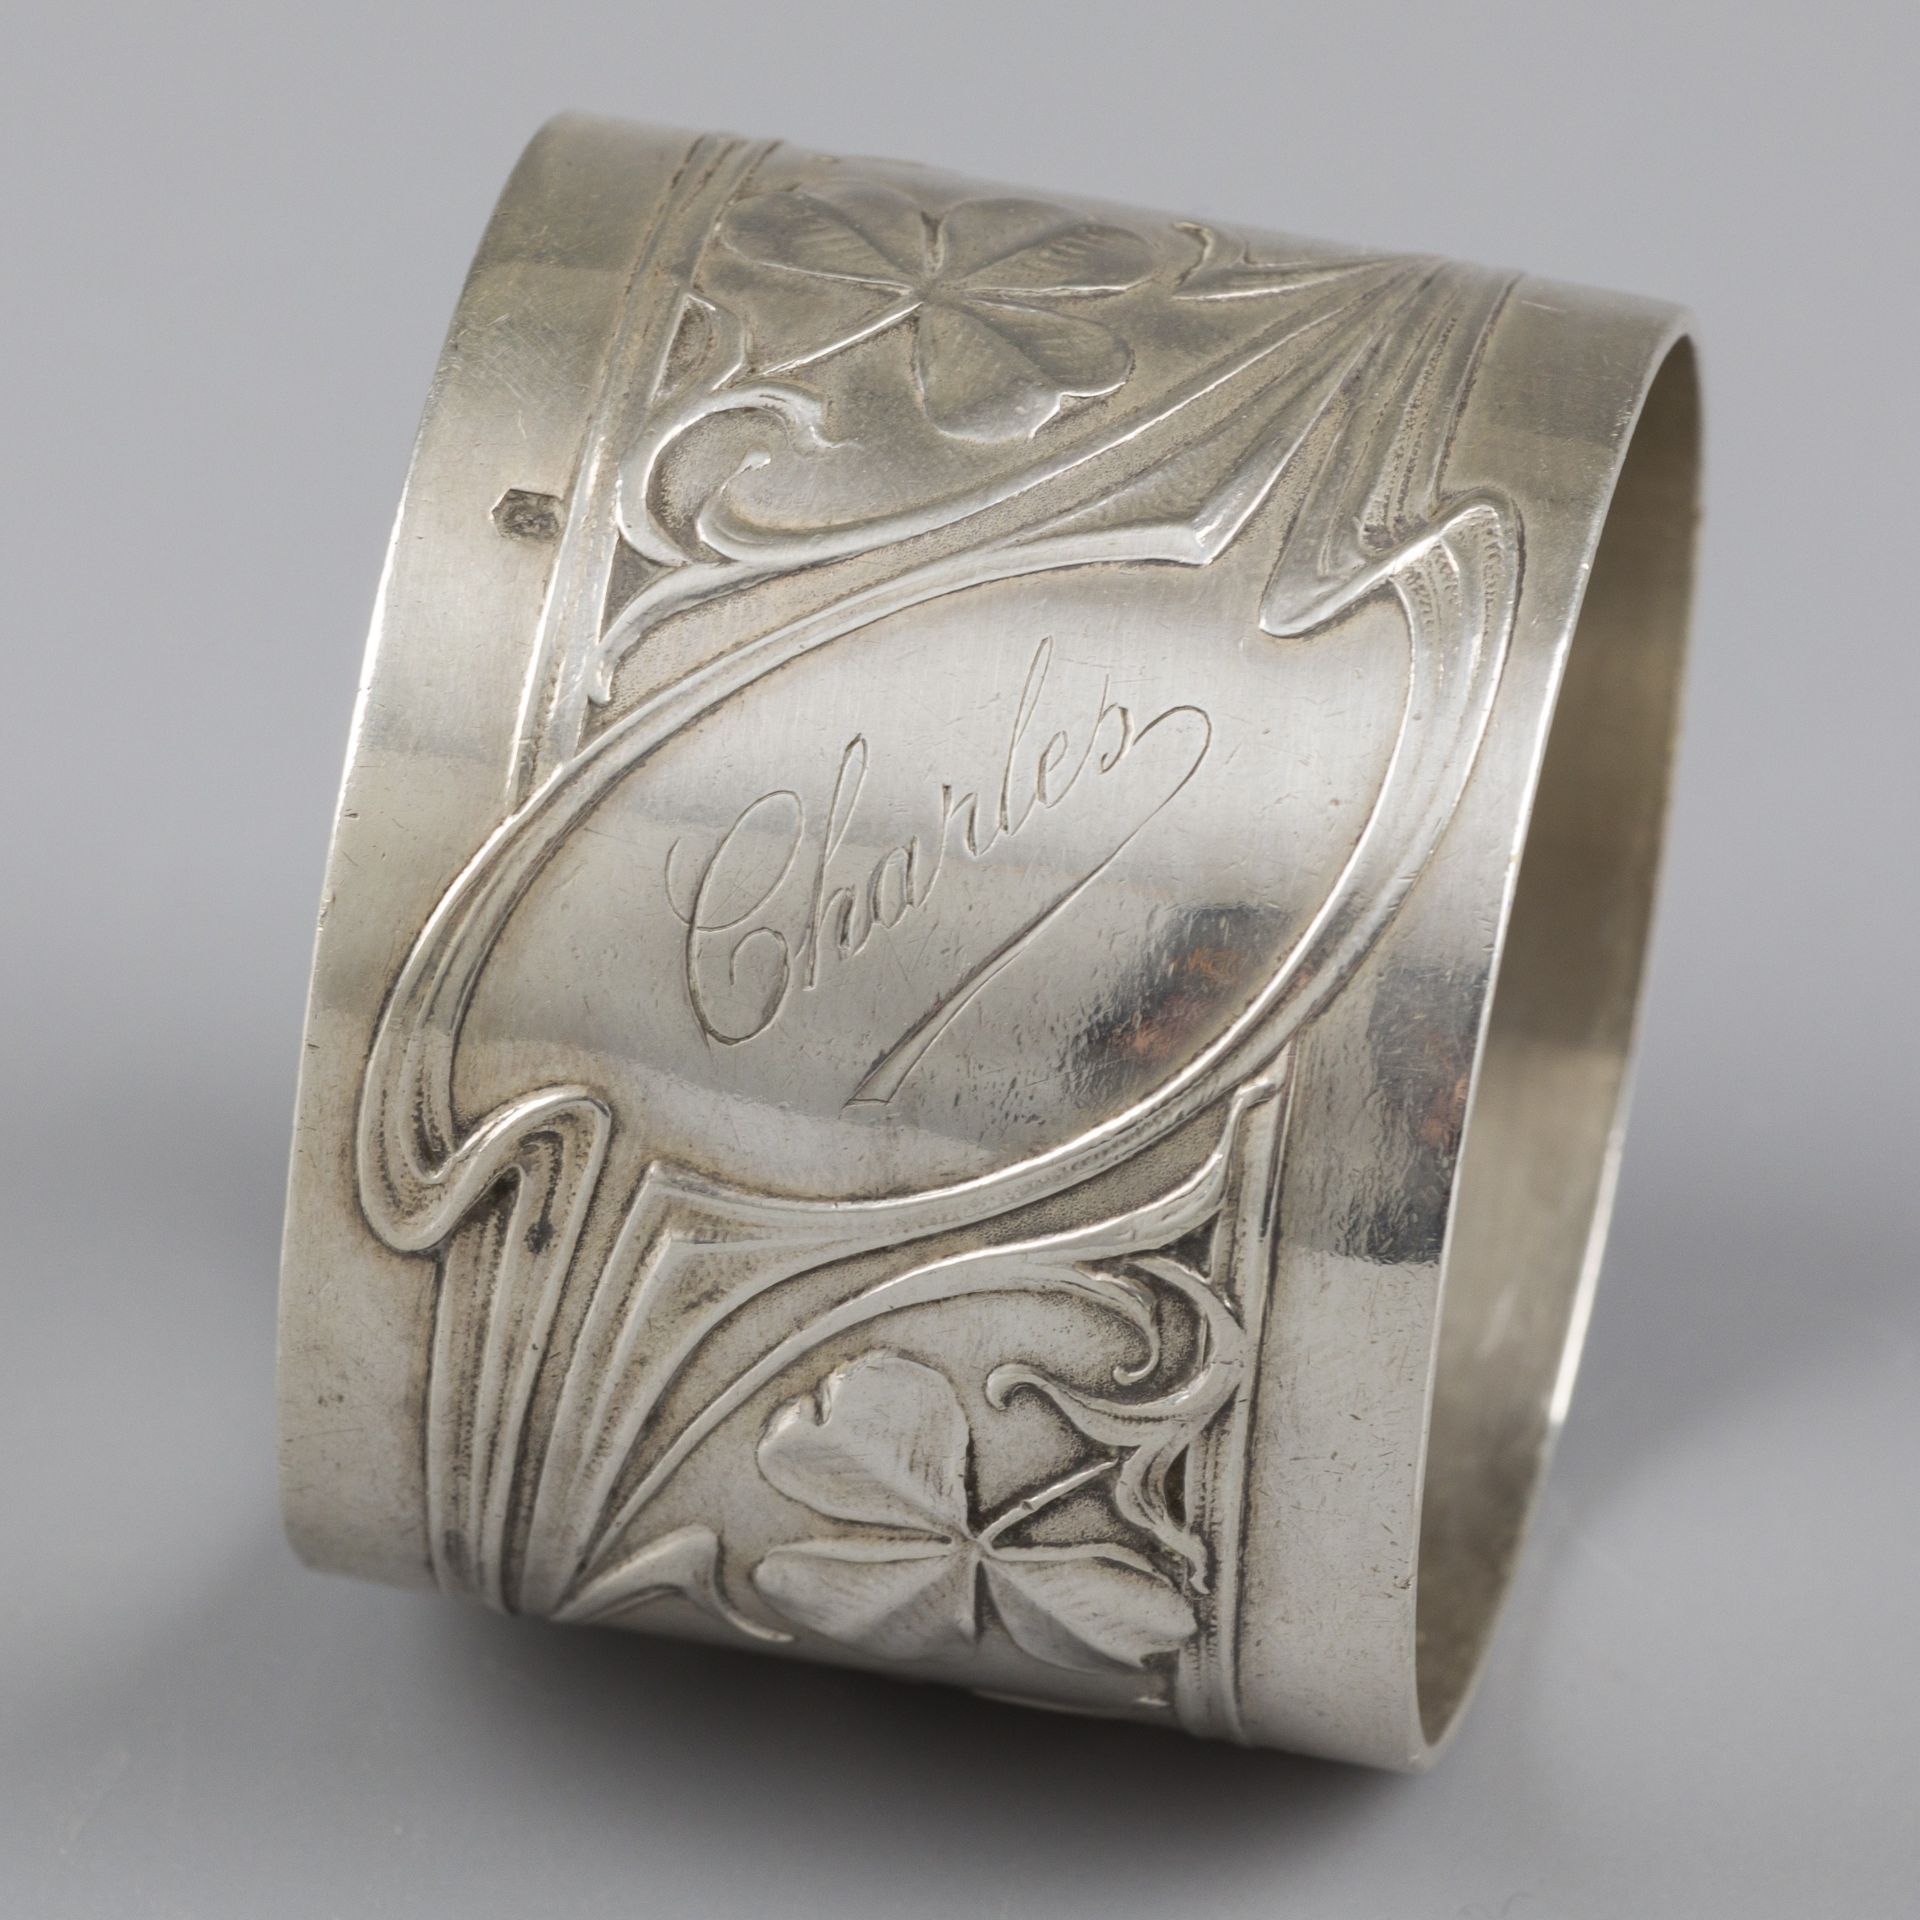 No reserve - 2-piece set of silver napkin rings. - Image 4 of 5